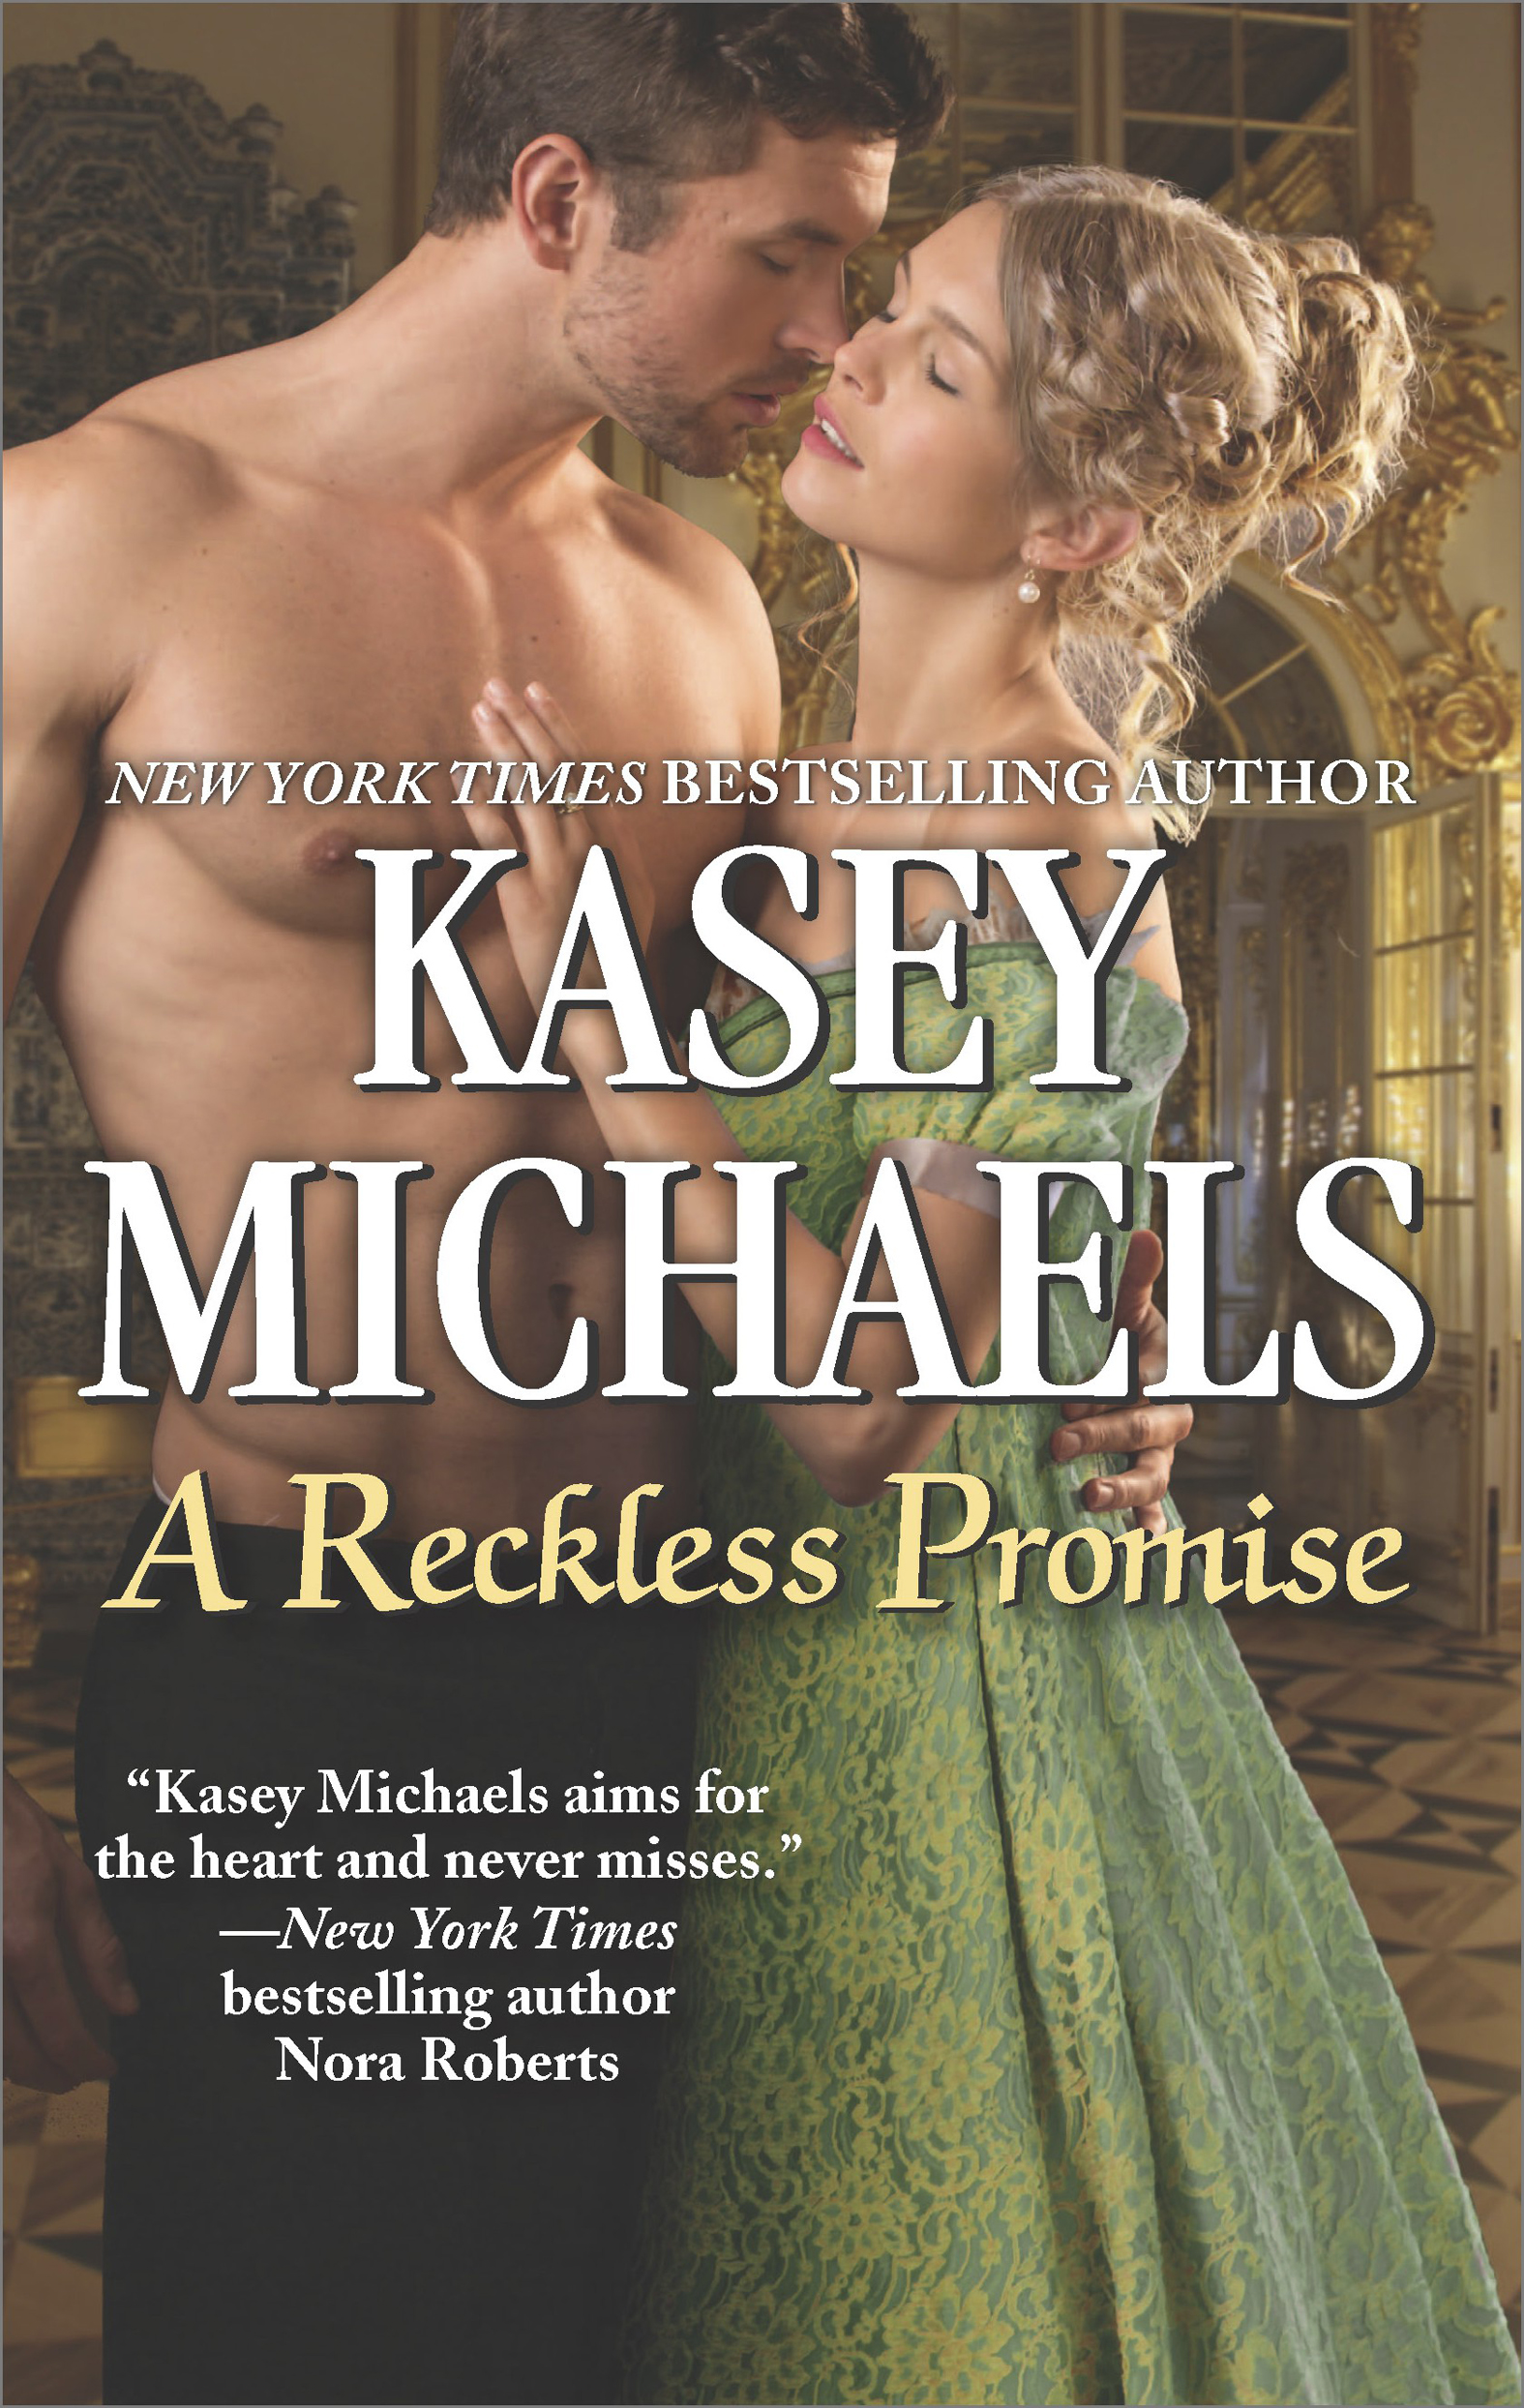 A Reckless Promise (2016) by Kasey Michaels